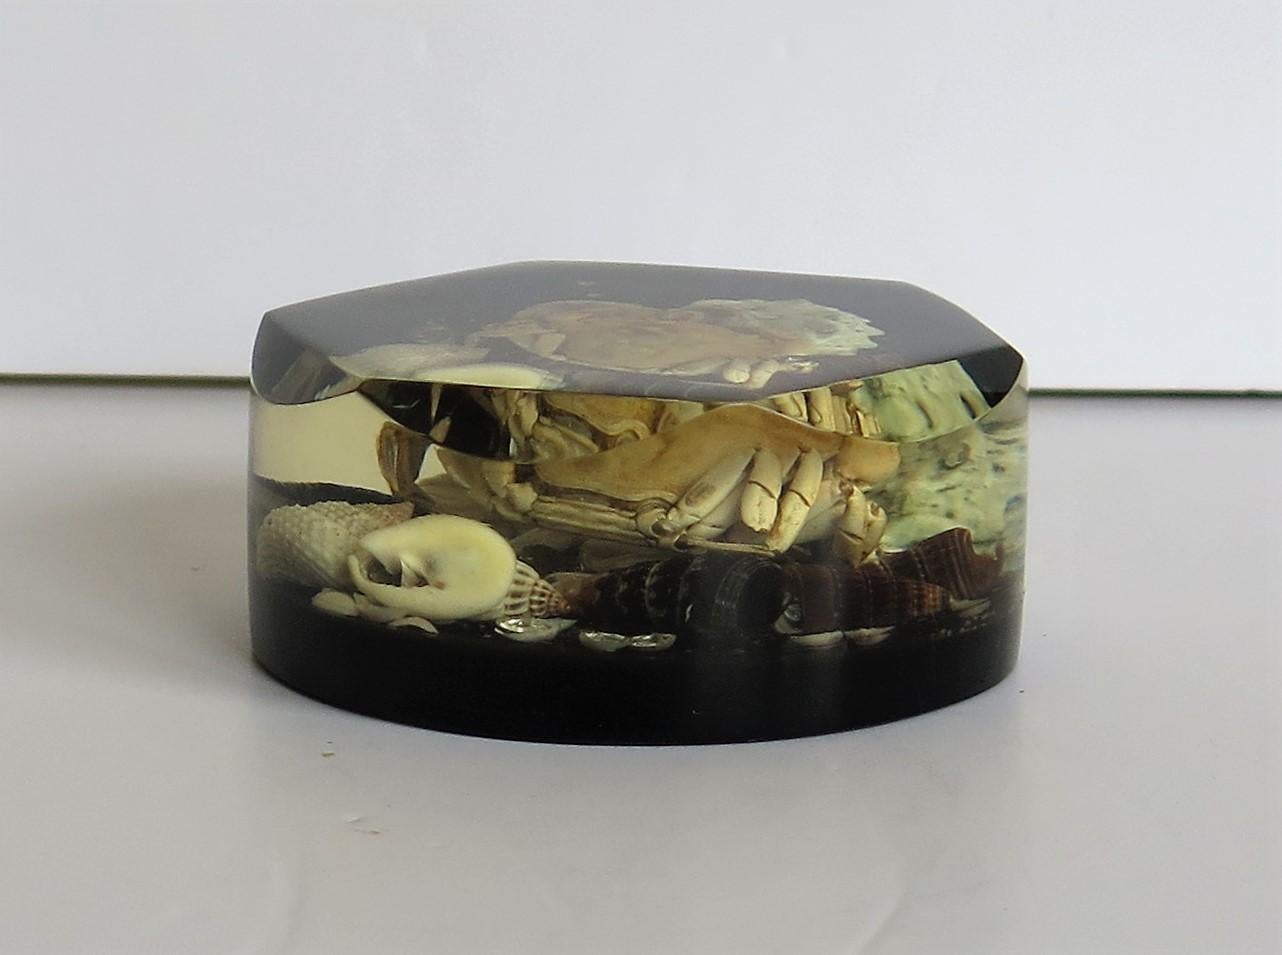 English Paperweight with Seashore Theme Handmade with Real Sea Shells & Crab, circa 1970 For Sale